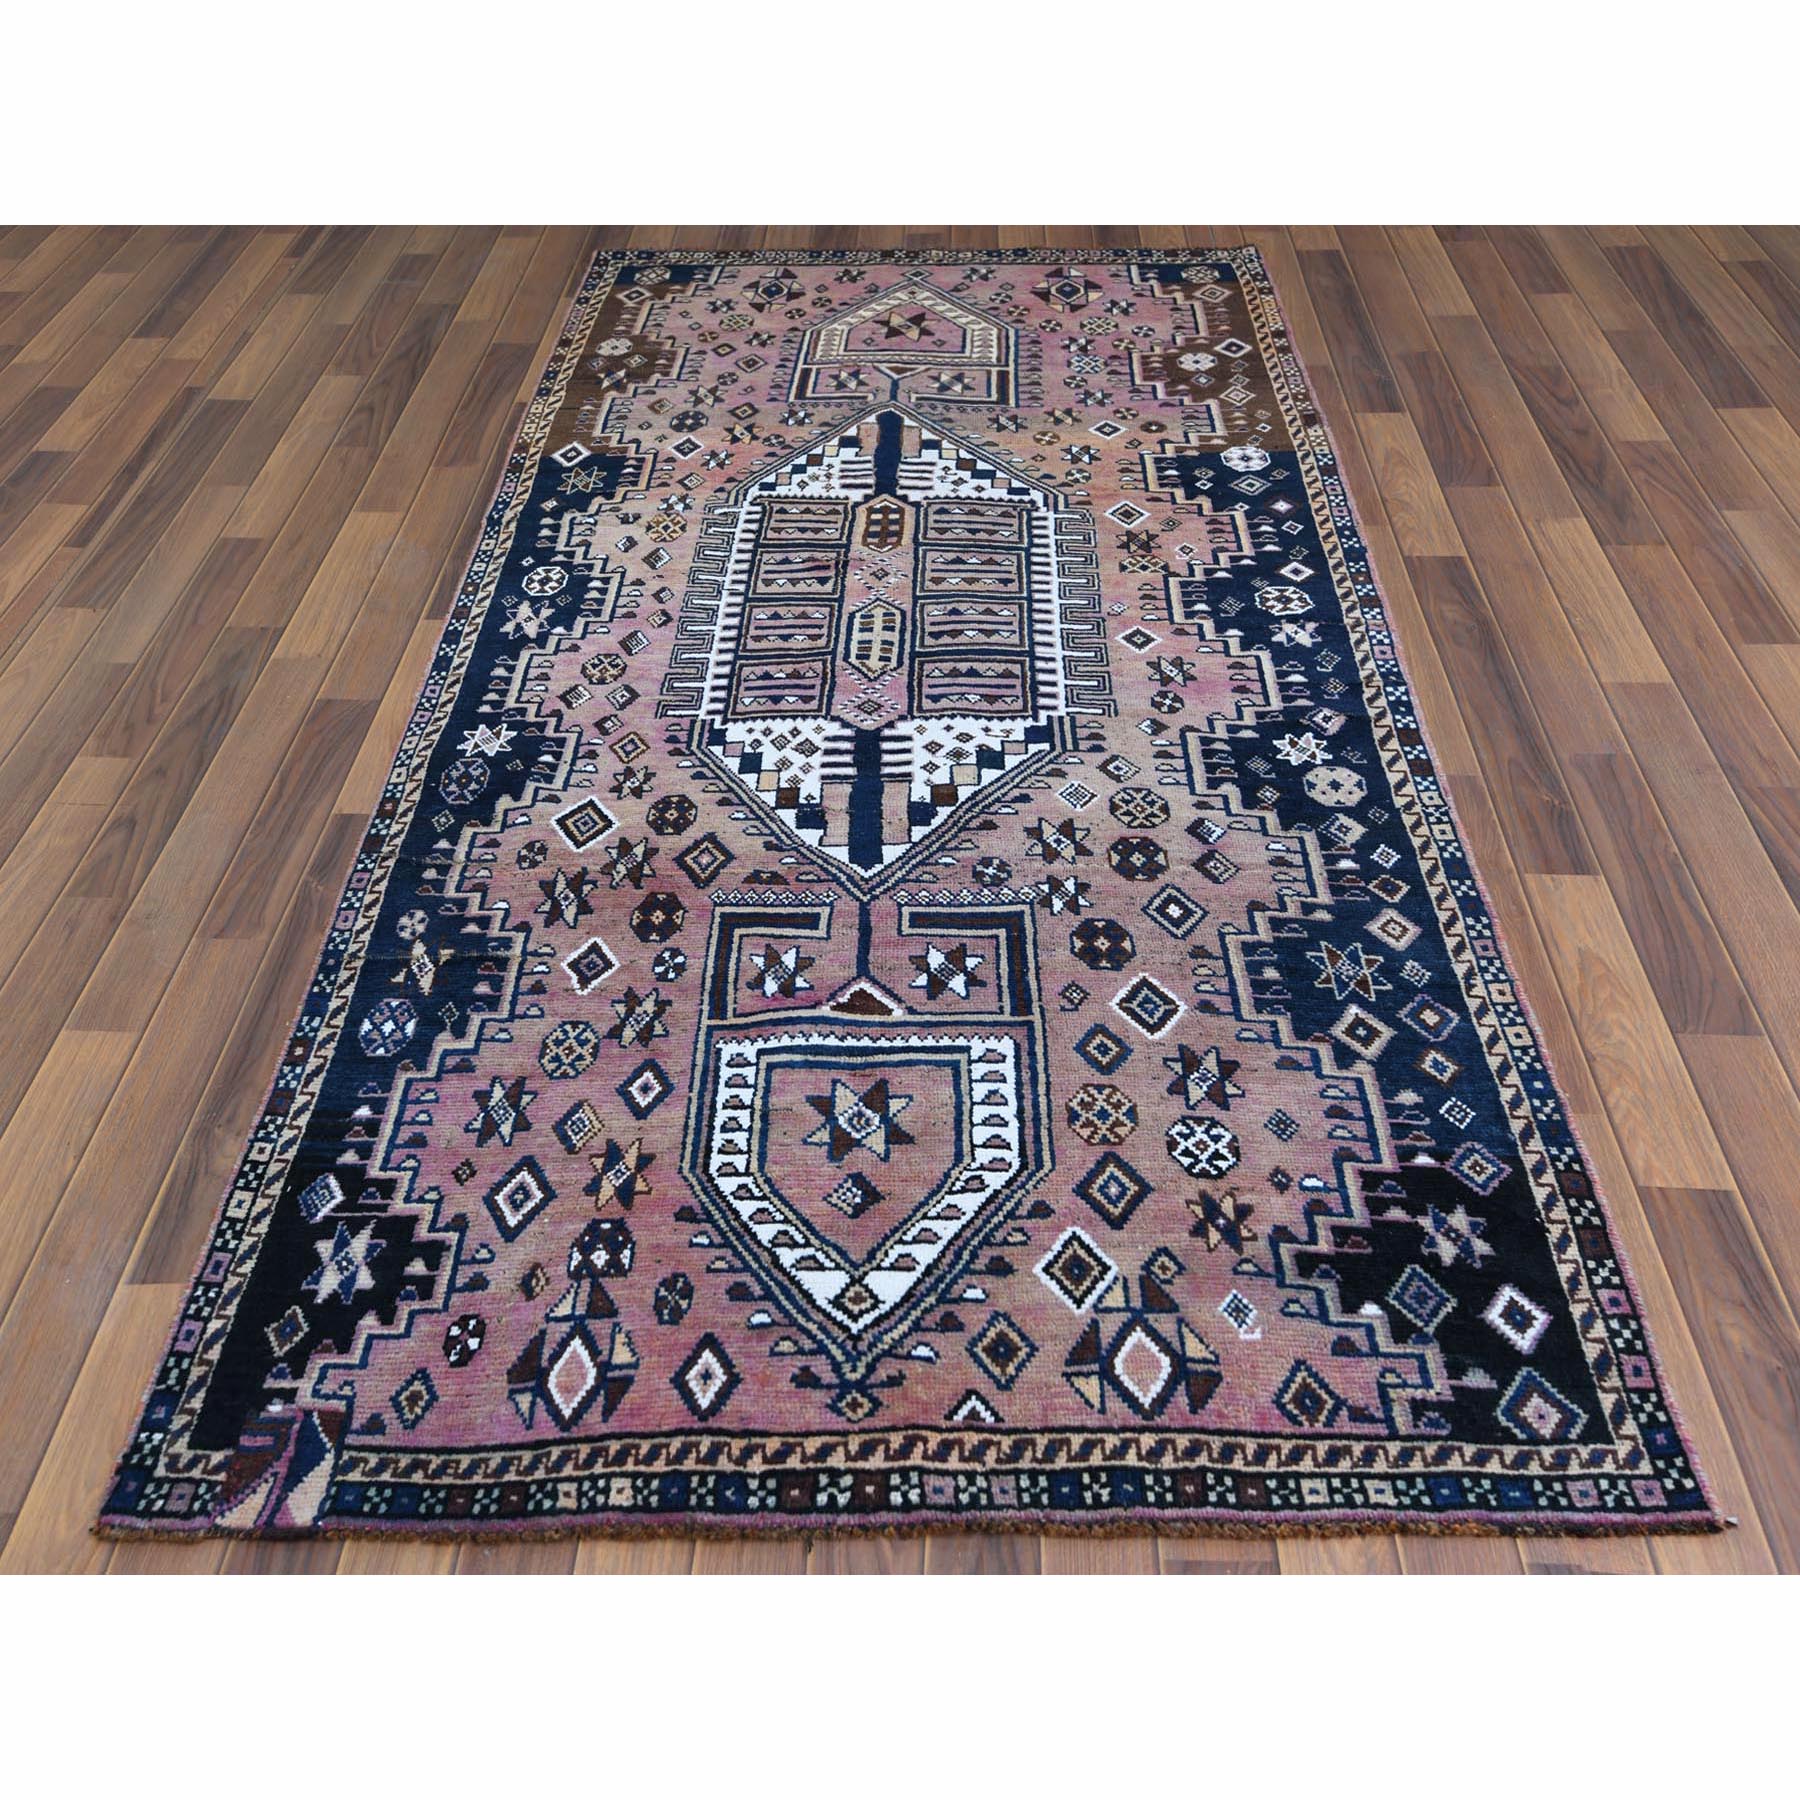 4'3"x8' Vintage Persian Shiraz with Faded Purple Cast, Clean, Hand Woven, Sheared Low, a Good Patch on Left Corner, Pure Wool, Oriental Rug 